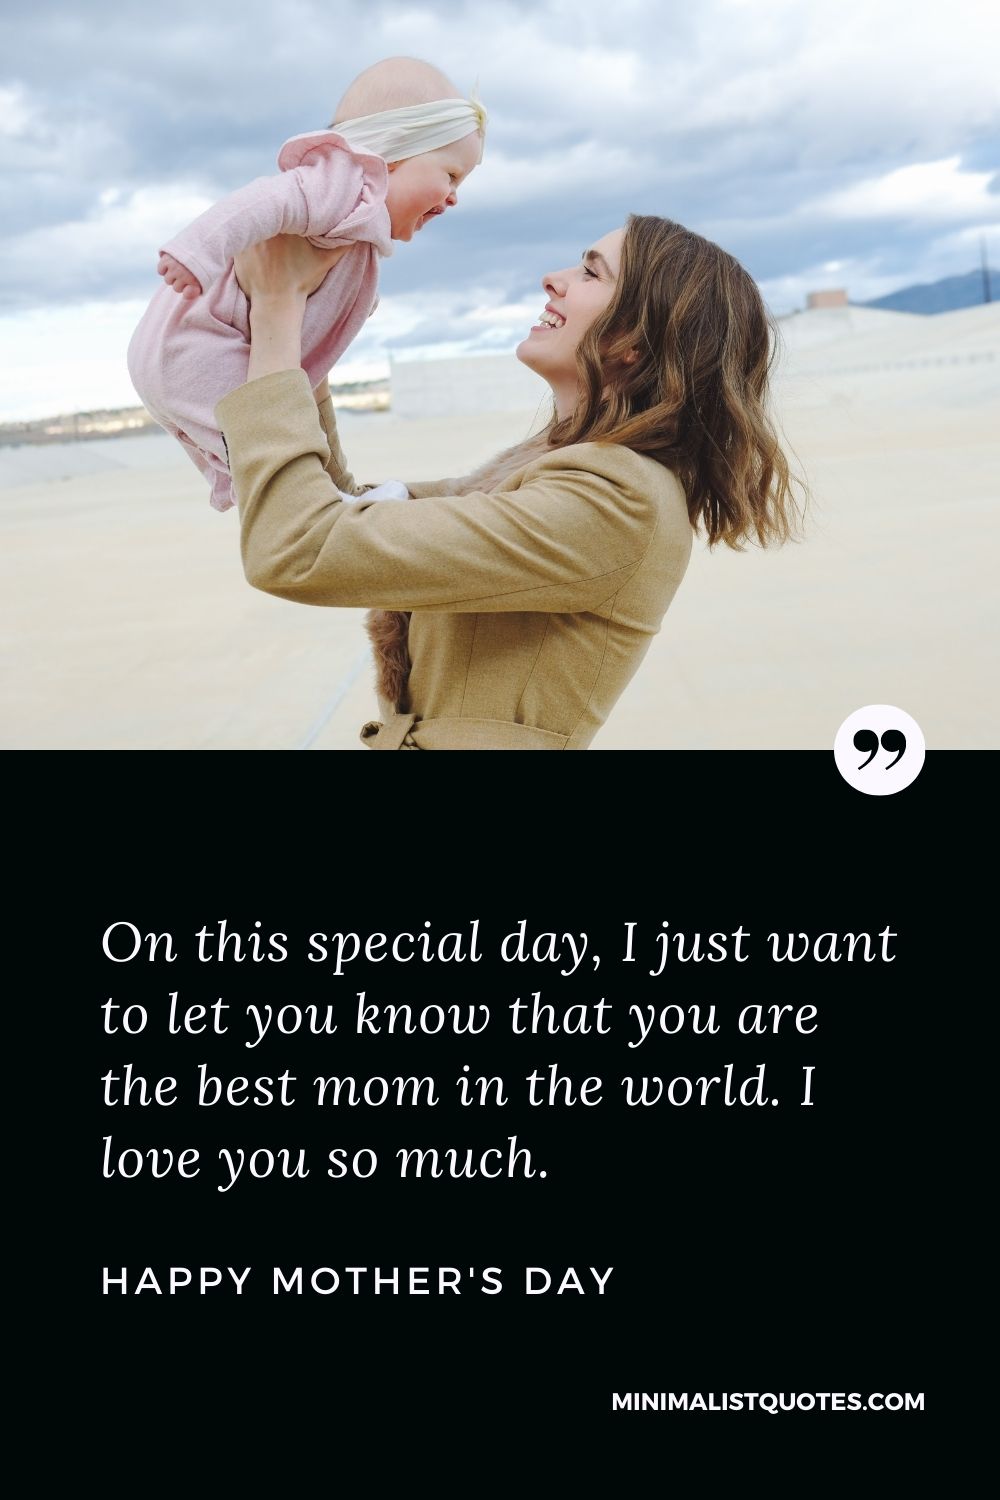 Mother's Day wish, message & quote with HD image: On this special day, I just want to let you know that you are the best mom in the world. I love you so much. Happy Mother's Day!